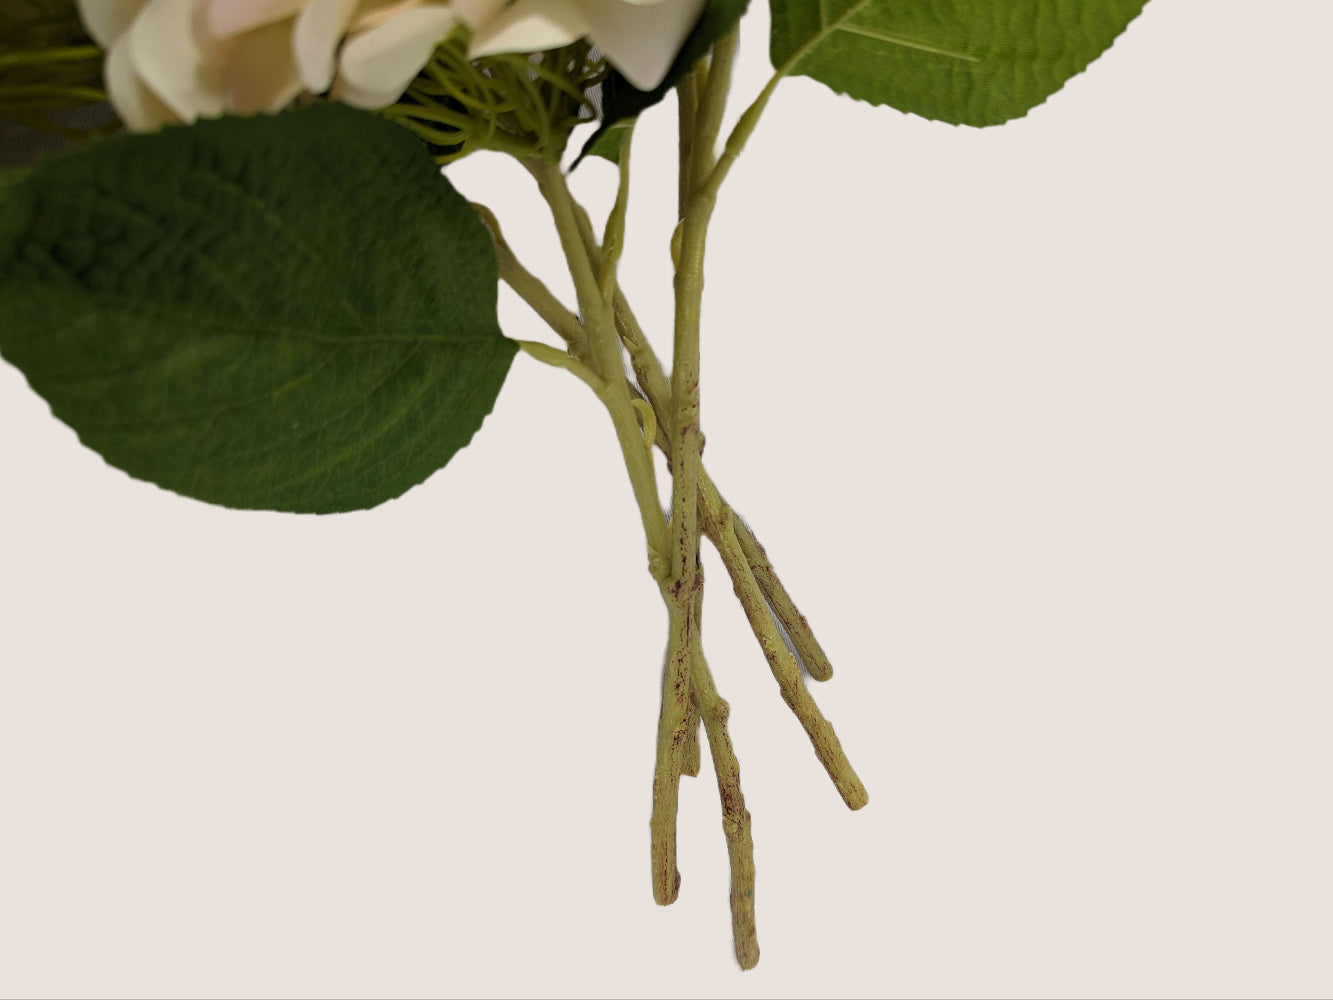 Picture focusing on the stem of an artificial hydrangea which has a color gradient including brown and green, adding to the realism of the flower. The image provides a close-up view of the stem against a white background.